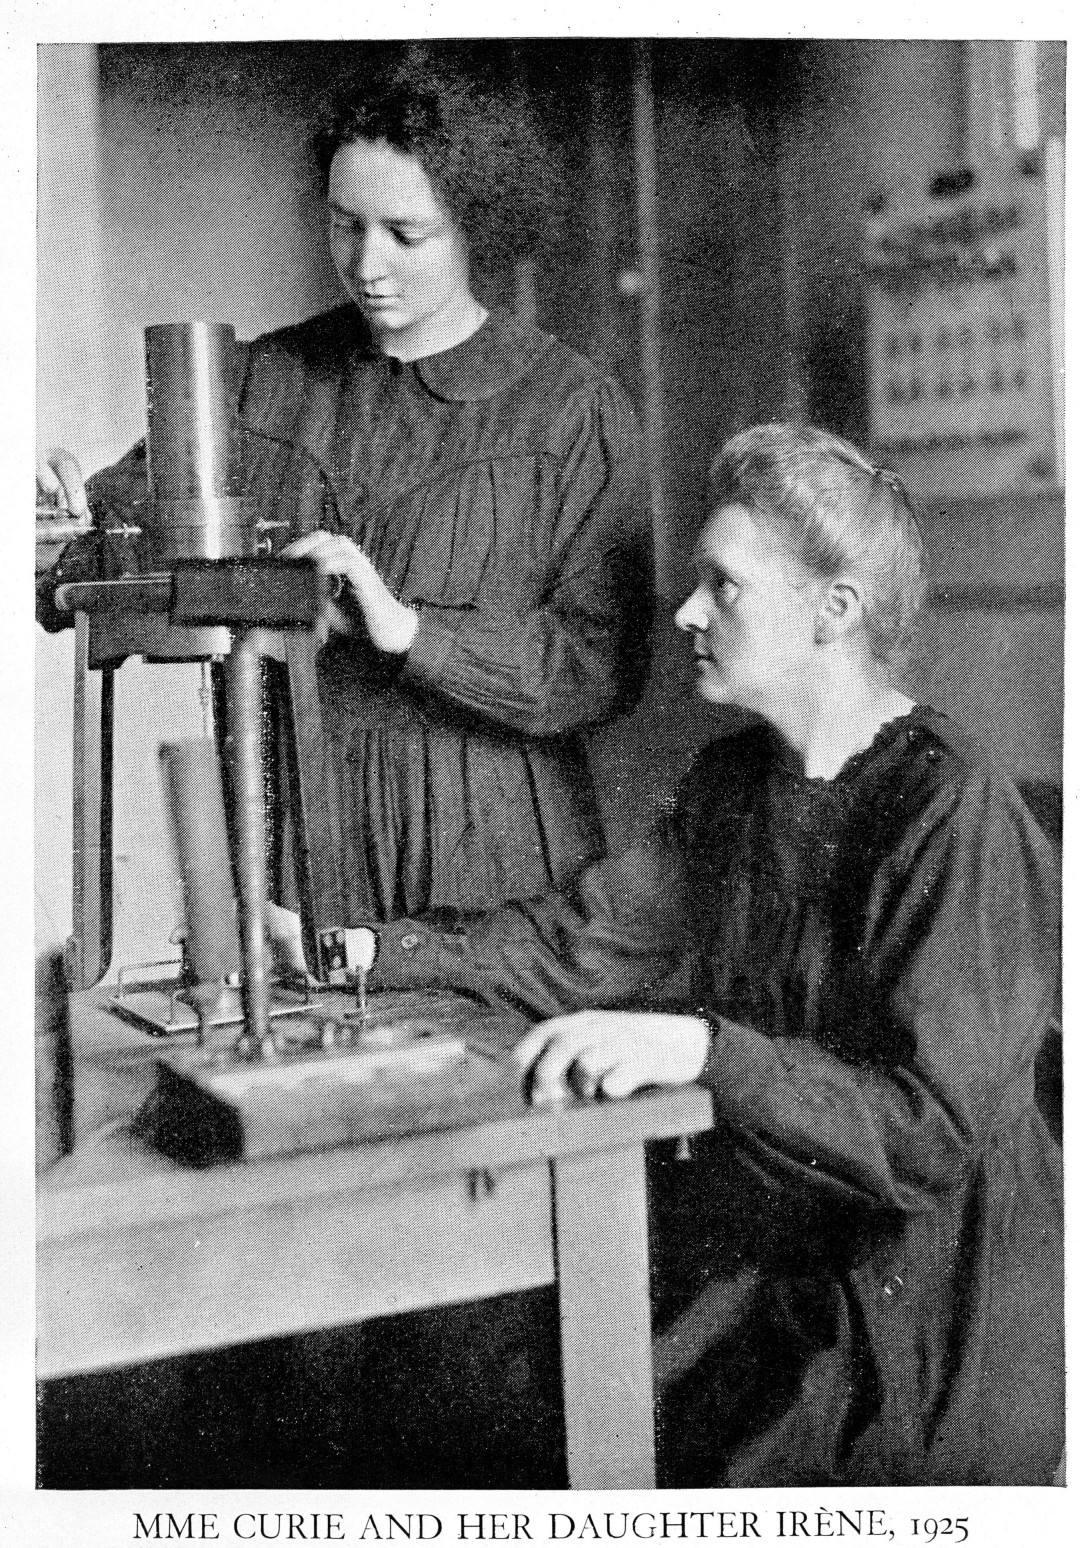 Scientists Irene Curie and Marie Curie